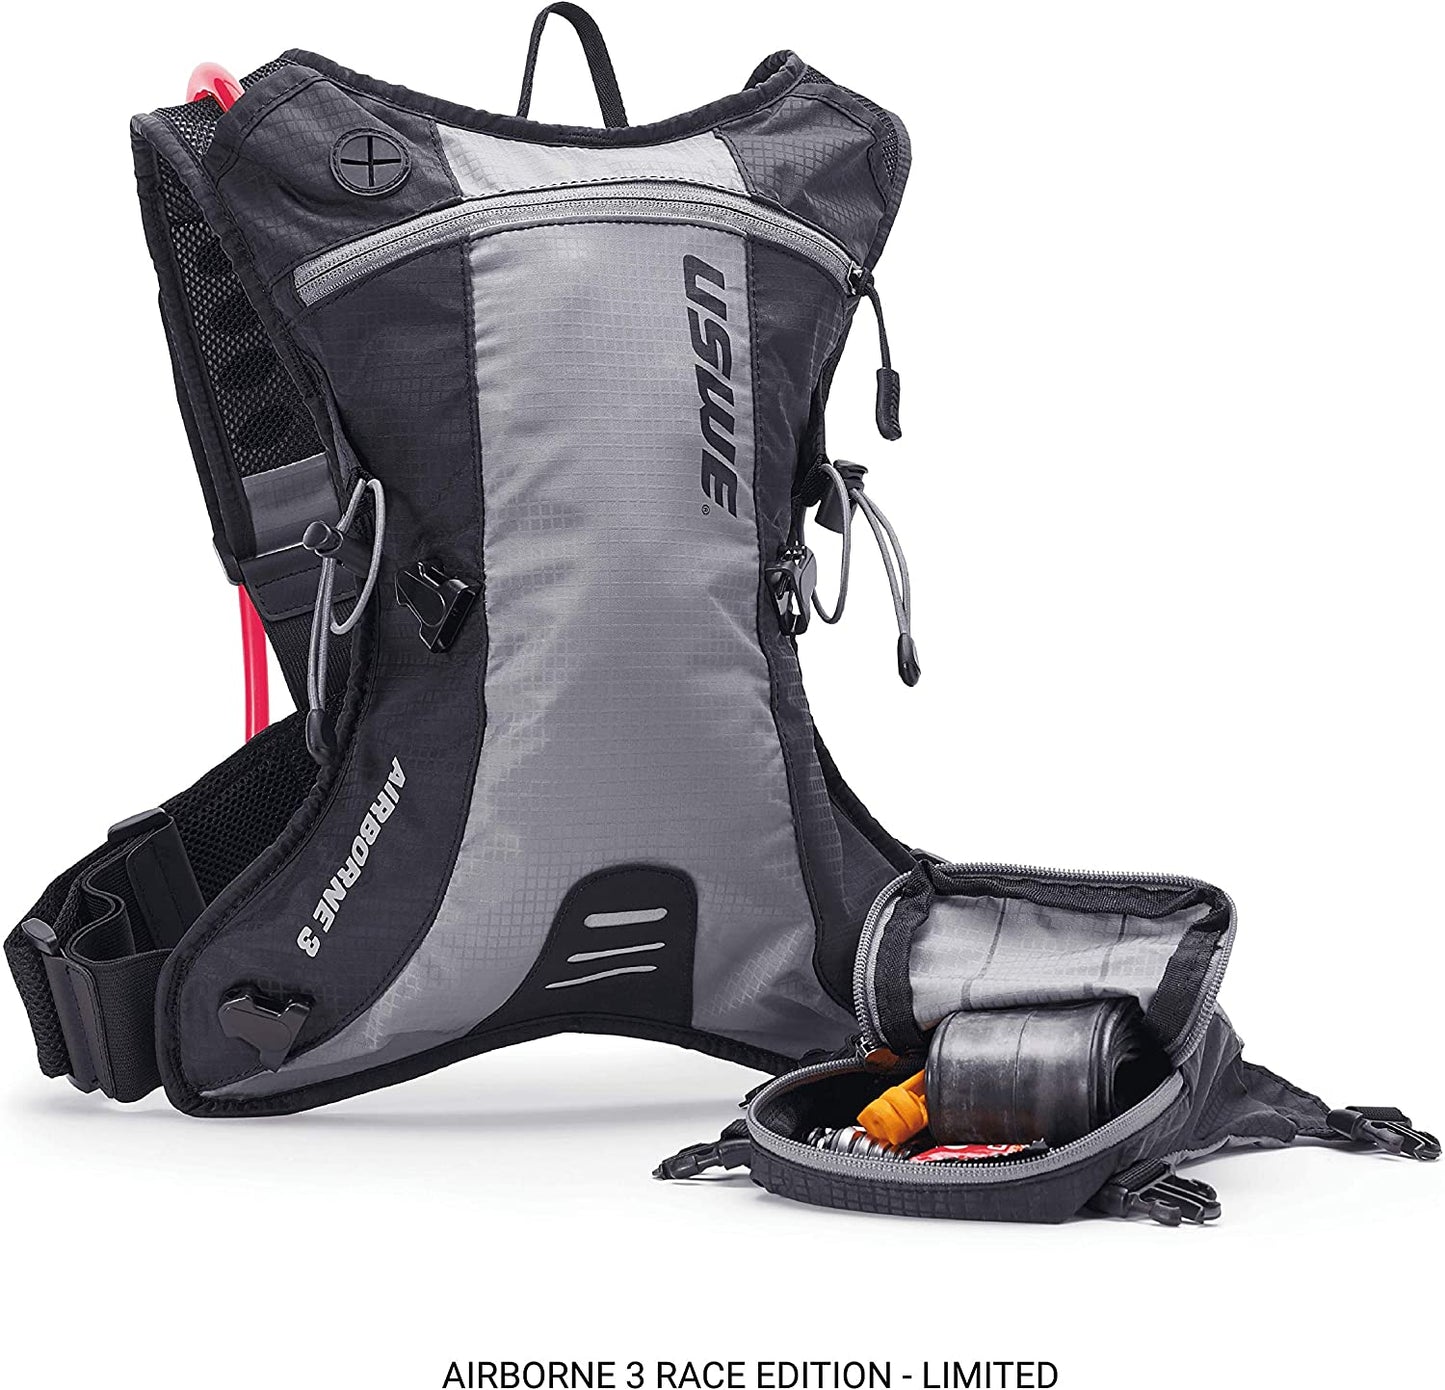 USWE Airborne - Limited Race Edition, Hydration Pack, Bounce Free, for MTB, Mountain Bike, Cycling, Grey Black - (For 1 piece(s))